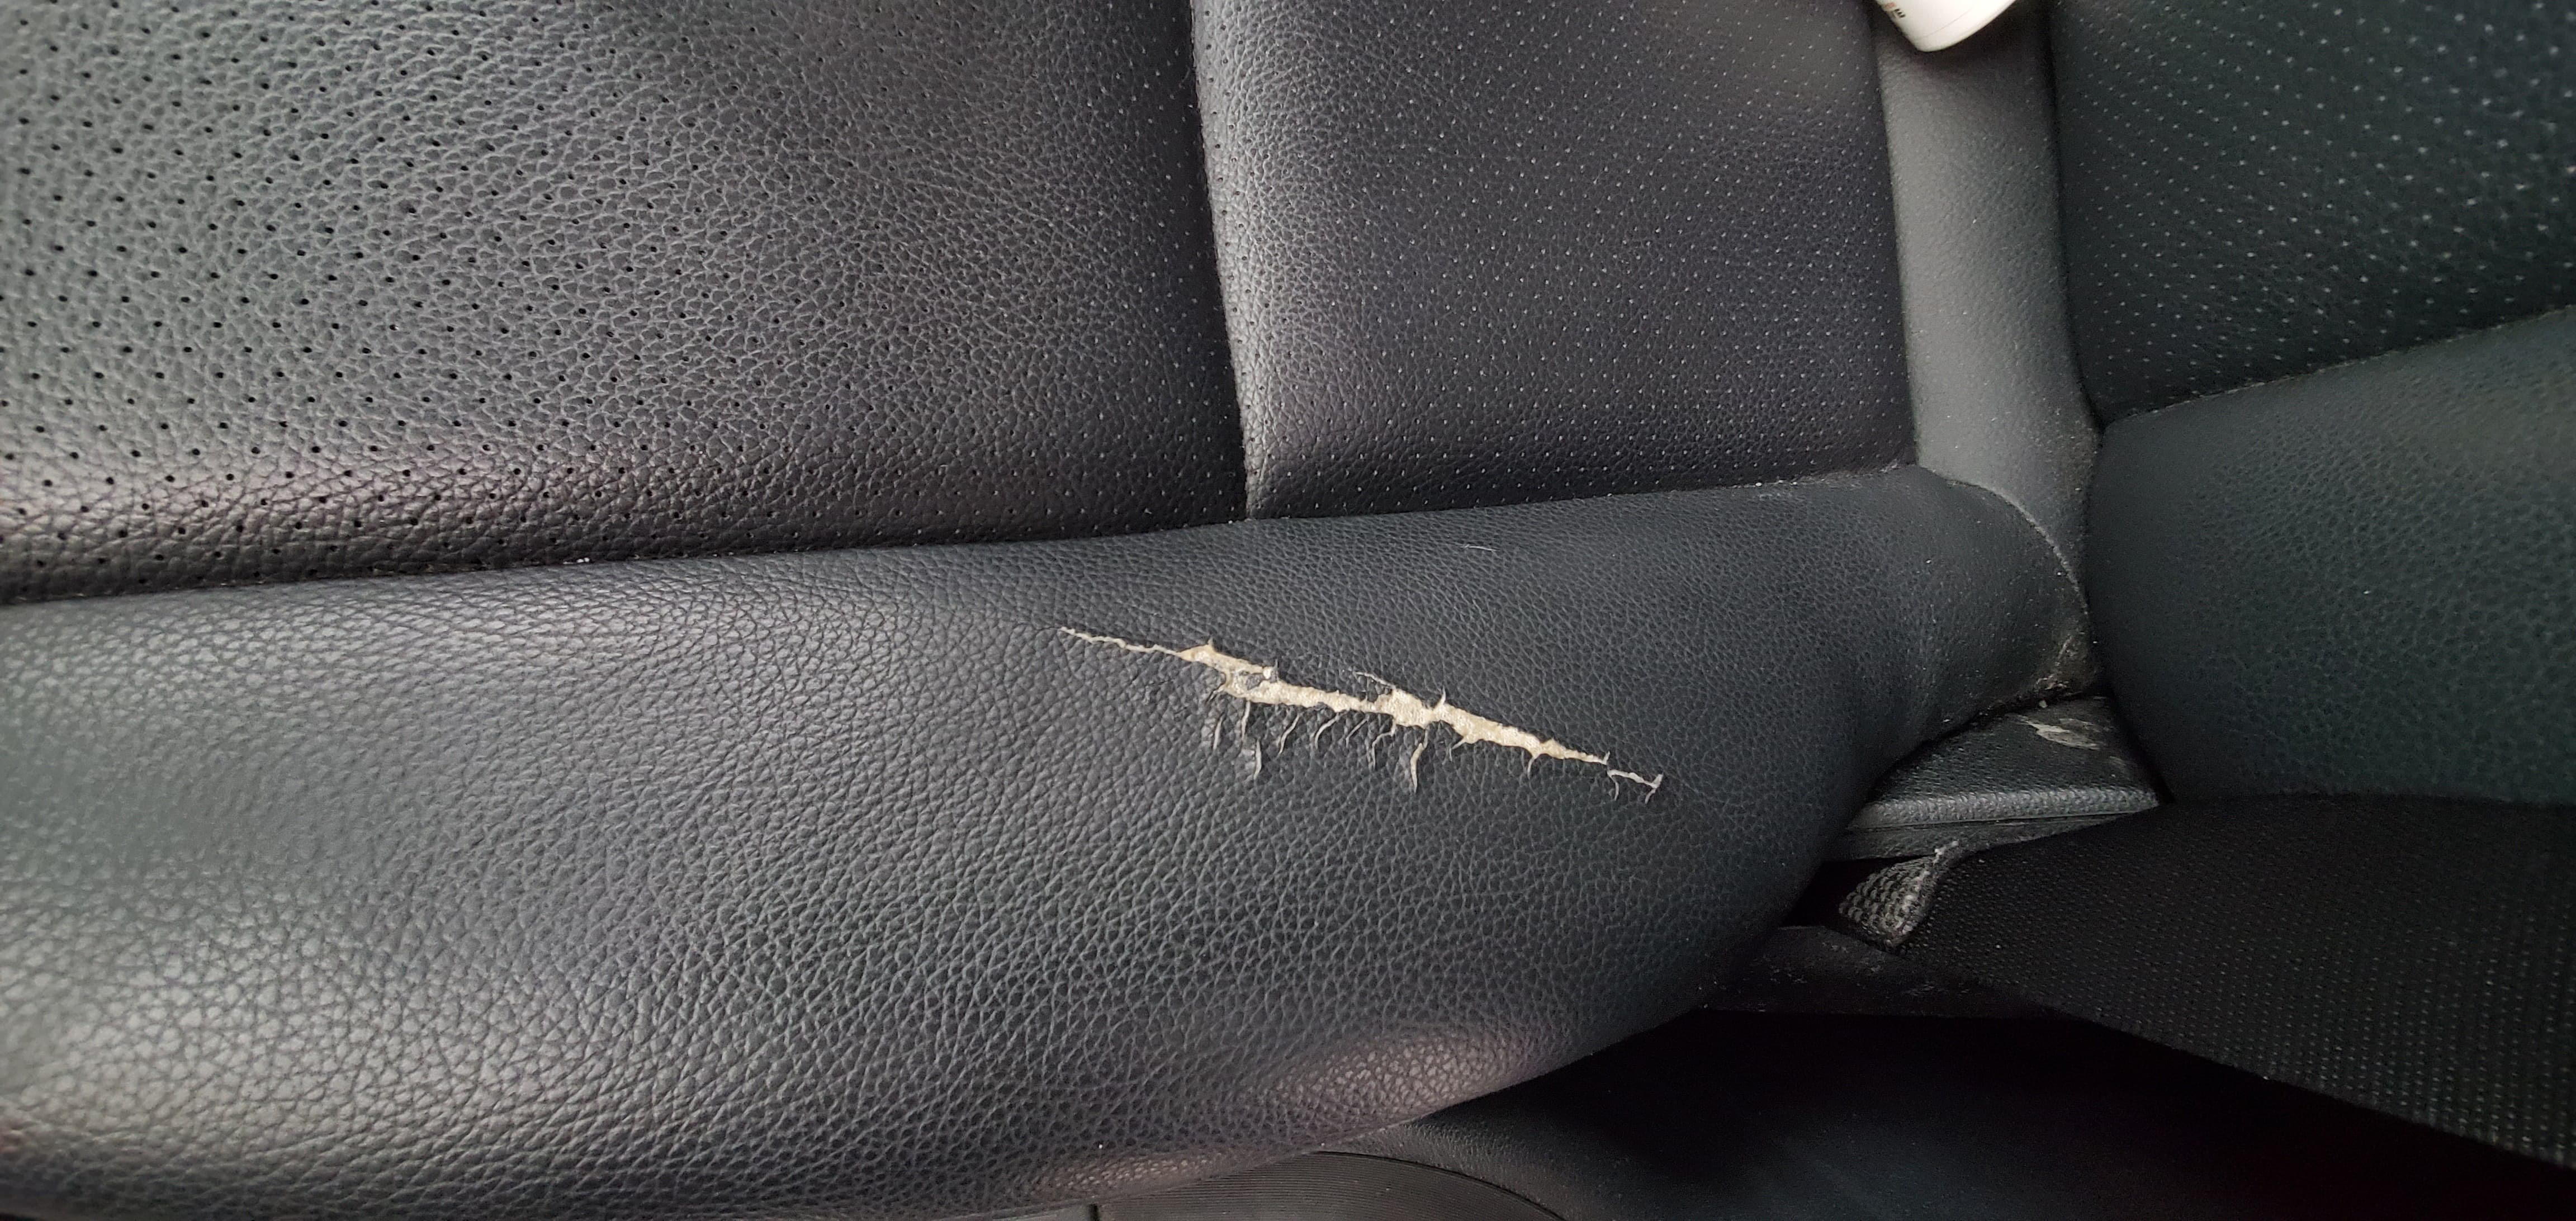 How To Repair A Leather Car Seat - Repair Small Rip In Leather Seat